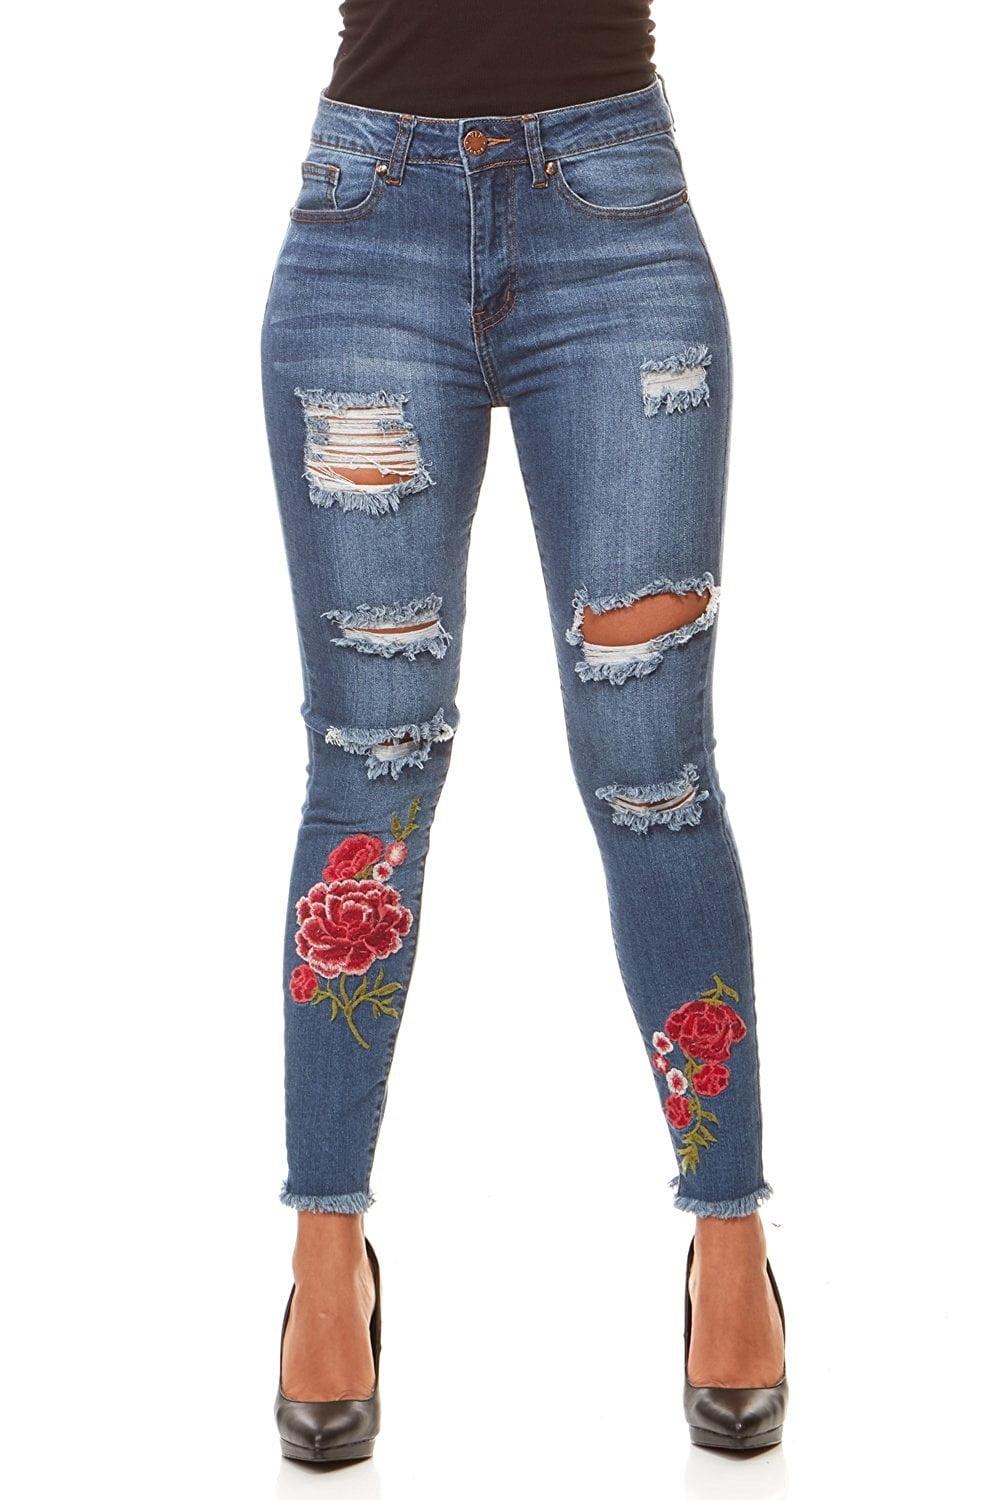 VIP Jeans for women High Waisted Ripped and Distressed Skinny Stretchy ...